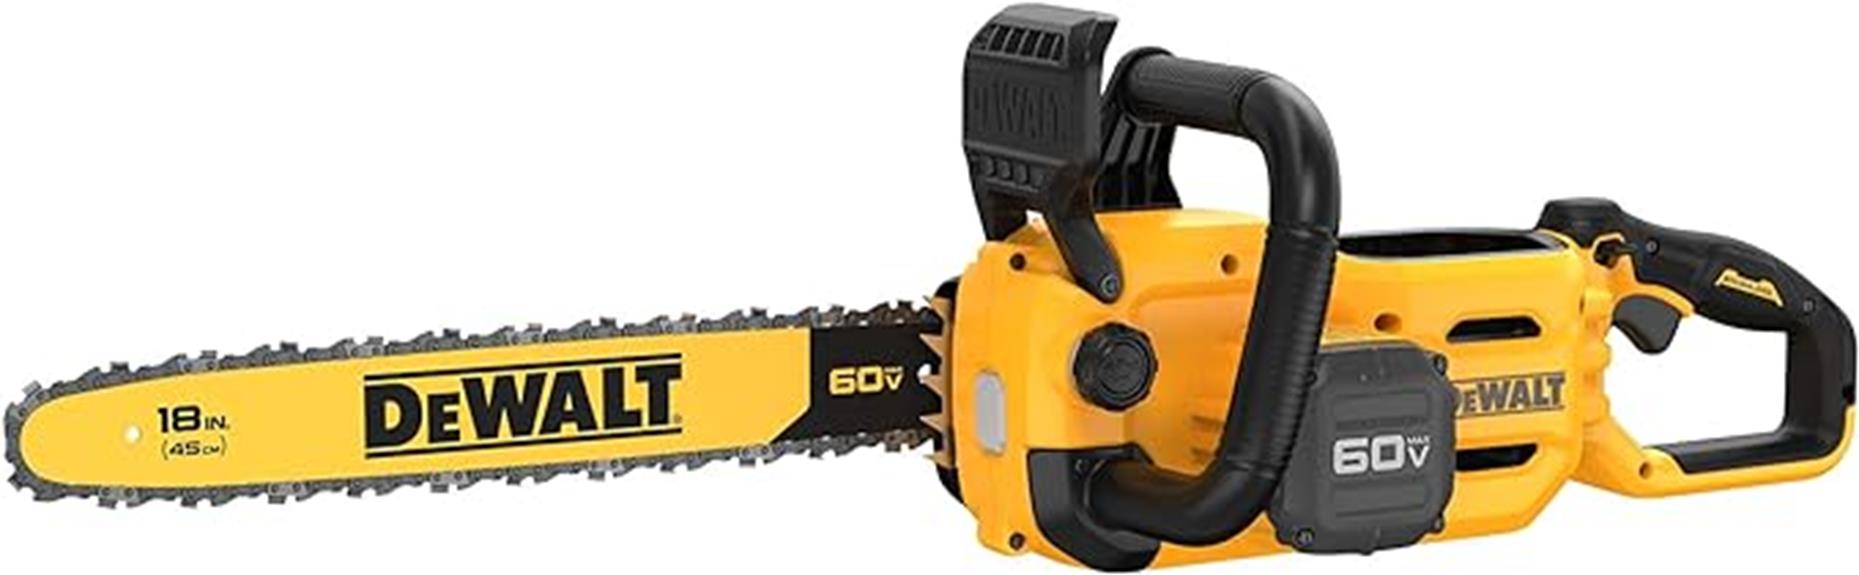 powerful cordless chainsaw tool